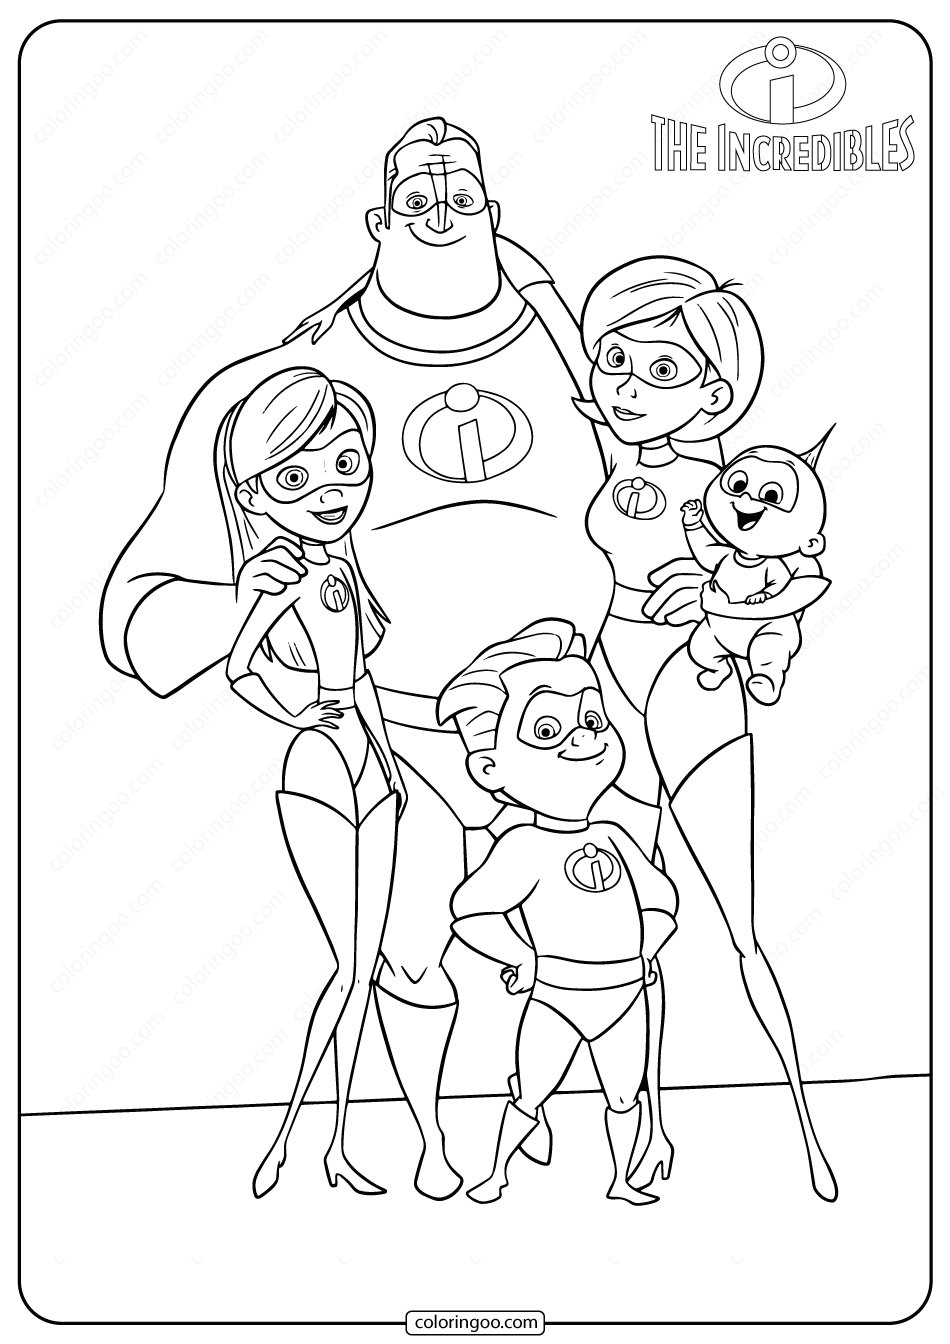 The Incredibles Family Portrait Coloring Pages